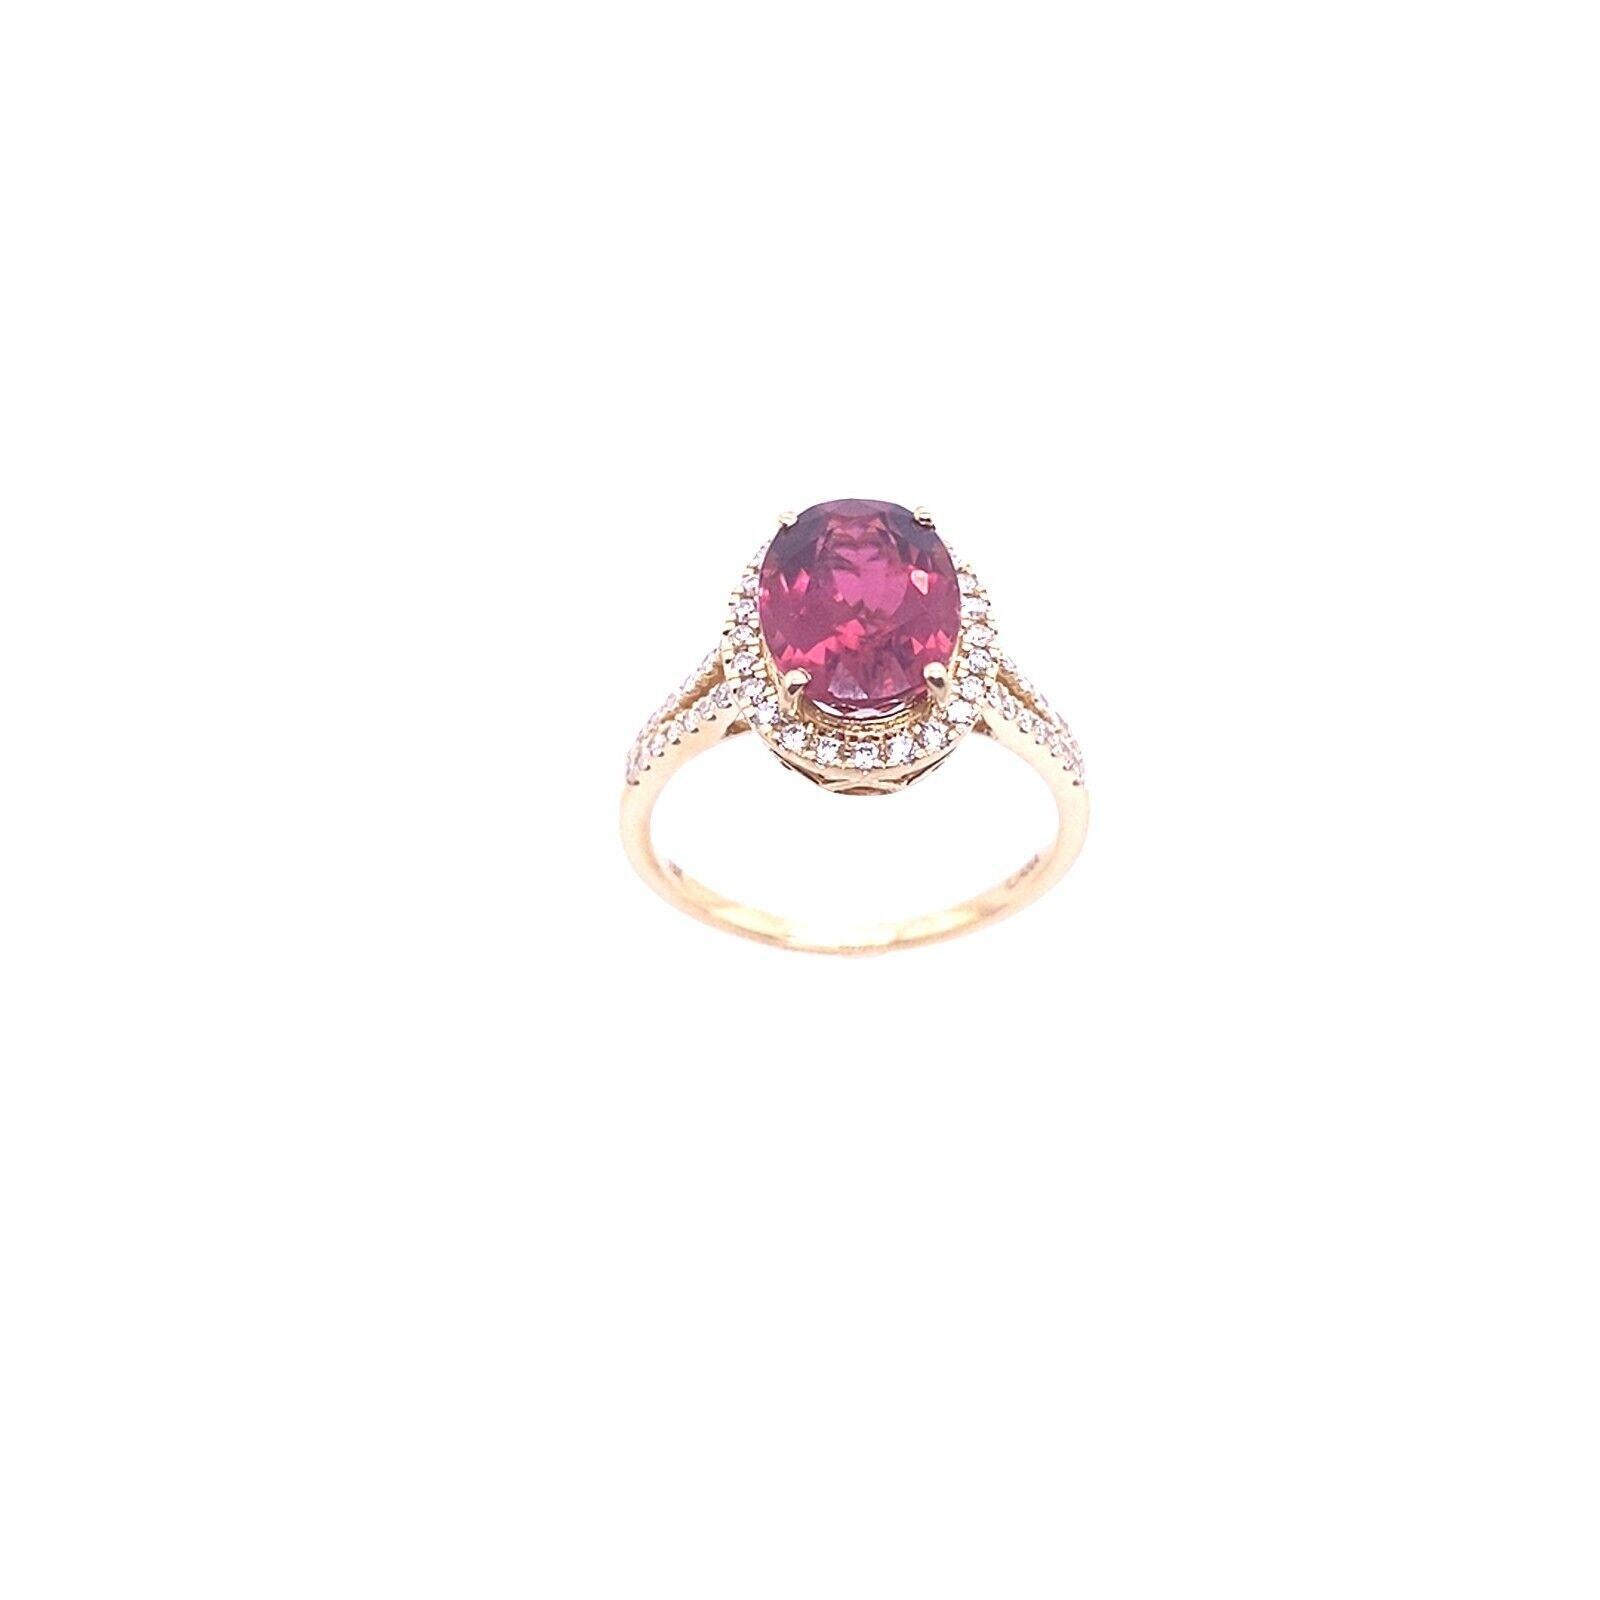 This stunning and elegant ring features a 3.0ct oval cut Rubellite surrounded by 0.25ct Diamonds and set in an 18ct Yellow Gold split shank band. The simple design of this ring makes it the perfect option for a special occasion or everyday wear.